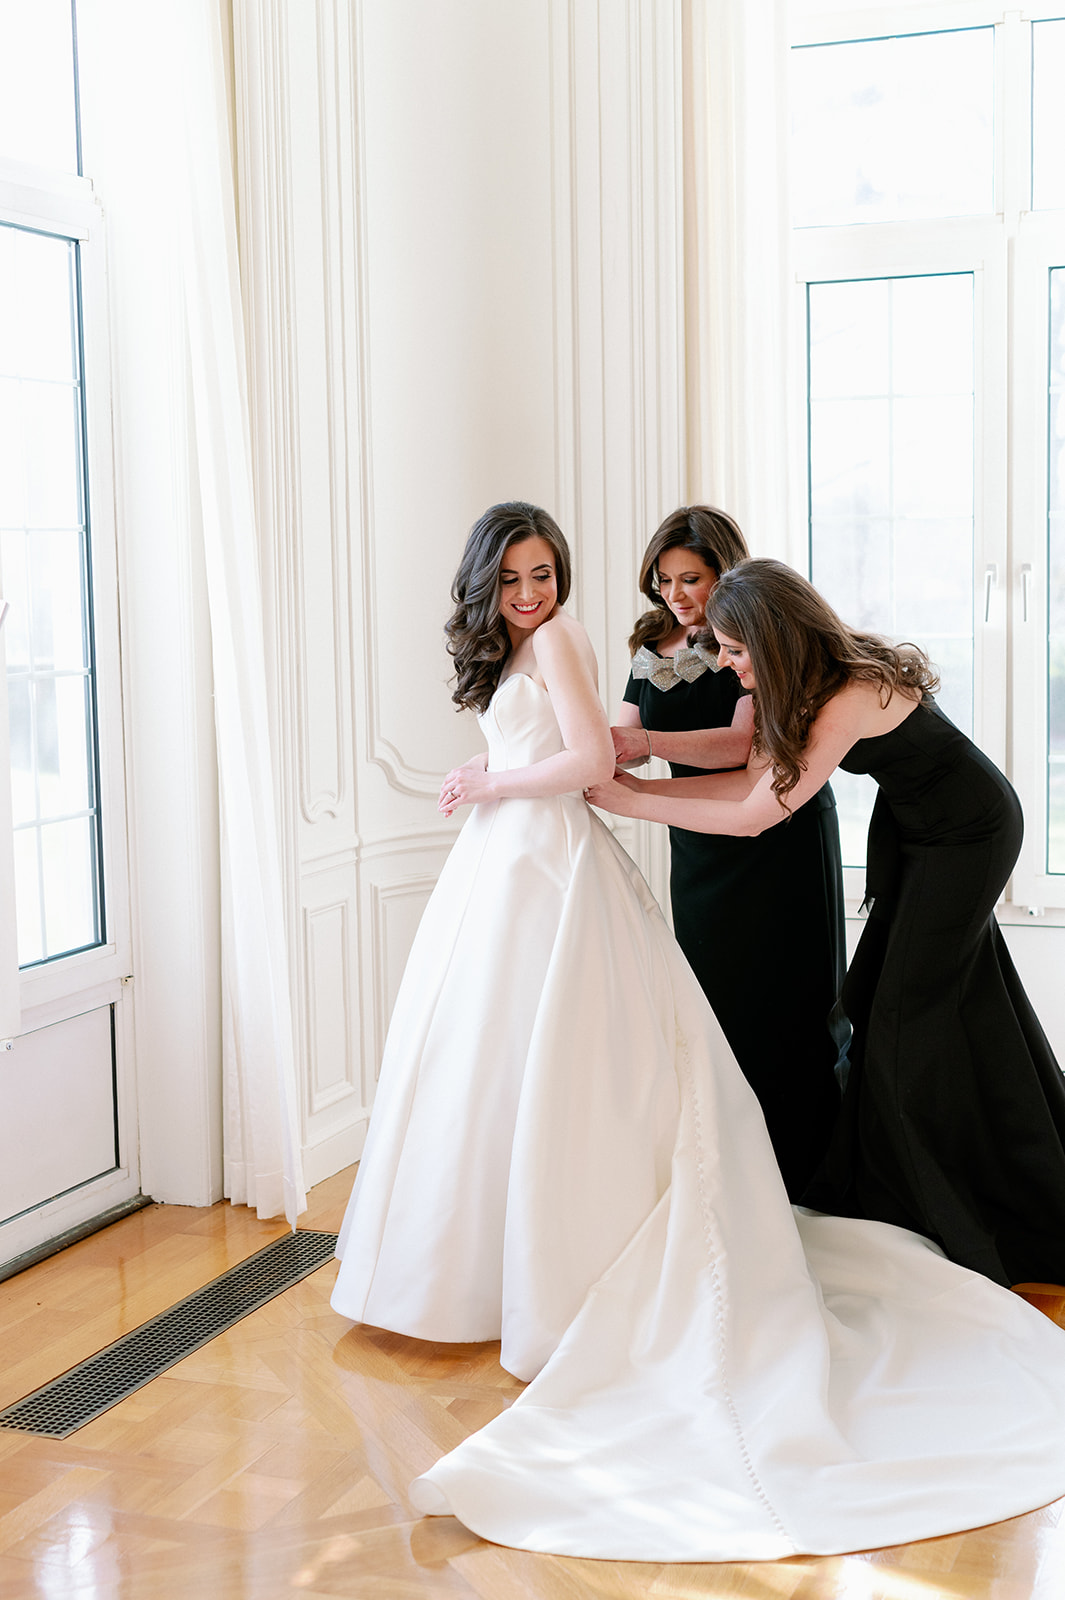 Rachel getting her wedding dress zipped up by her mom and sister in front of large windows at Pine Hollow Country Club.